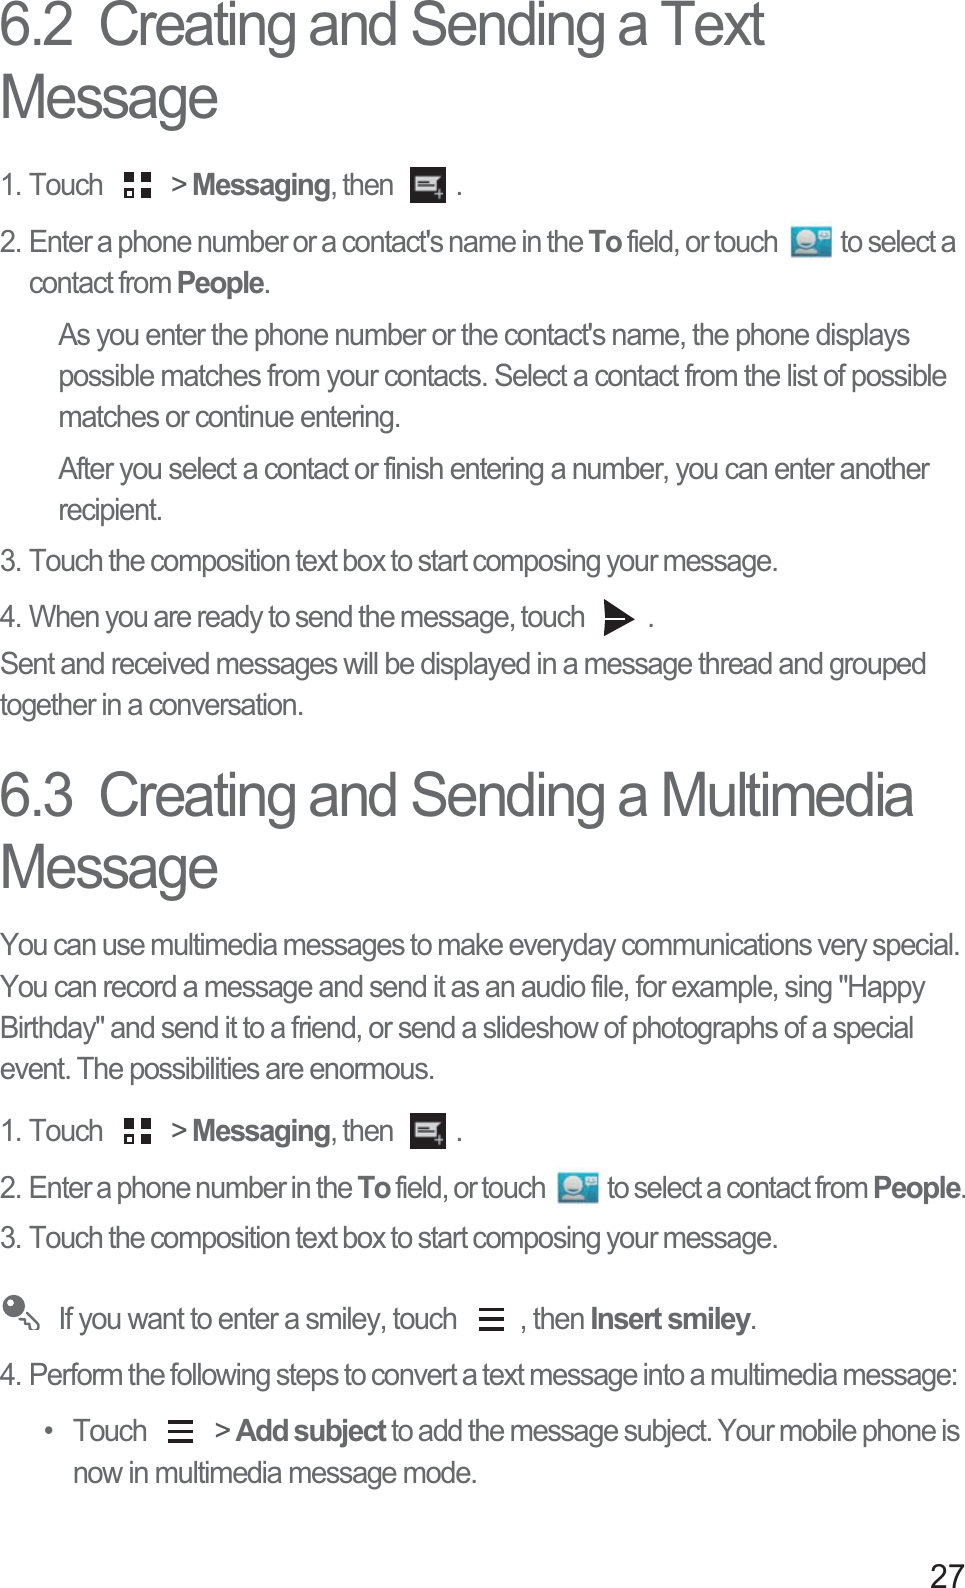 276.2  Creating and Sending a Text Message1. Touch   &gt; Messaging, then  . 2. Enter a phone number or a contact&apos;s name in the To field, or touch  to select a contact from People.As you enter the phone number or the contact&apos;s name, the phone displays possible matches from your contacts. Select a contact from the list of possible matches or continue entering.After you select a contact or finish entering a number, you can enter another recipient.3. Touch the composition text box to start composing your message. 4. When you are ready to send the message, touch  .Sent and received messages will be displayed in a message thread and grouped together in a conversation. 6.3  Creating and Sending a Multimedia MessageYou can use multimedia messages to make everyday communications very special. You can record a message and send it as an audio file, for example, sing &quot;Happy Birthday&quot; and send it to a friend, or send a slideshow of photographs of a special event. The possibilities are enormous. 1. Touch   &gt; Messaging, then  . 2. Enter a phone number in the To field, or touch  to select a contact from People.3. Touch the composition text box to start composing your message.  If you want to enter a smiley, touch  , then Insert smiley.4. Perform the following steps to convert a text message into a multimedia message: • Touch   &gt; Add subject to add the message subject. Your mobile phone is now in multimedia message mode.